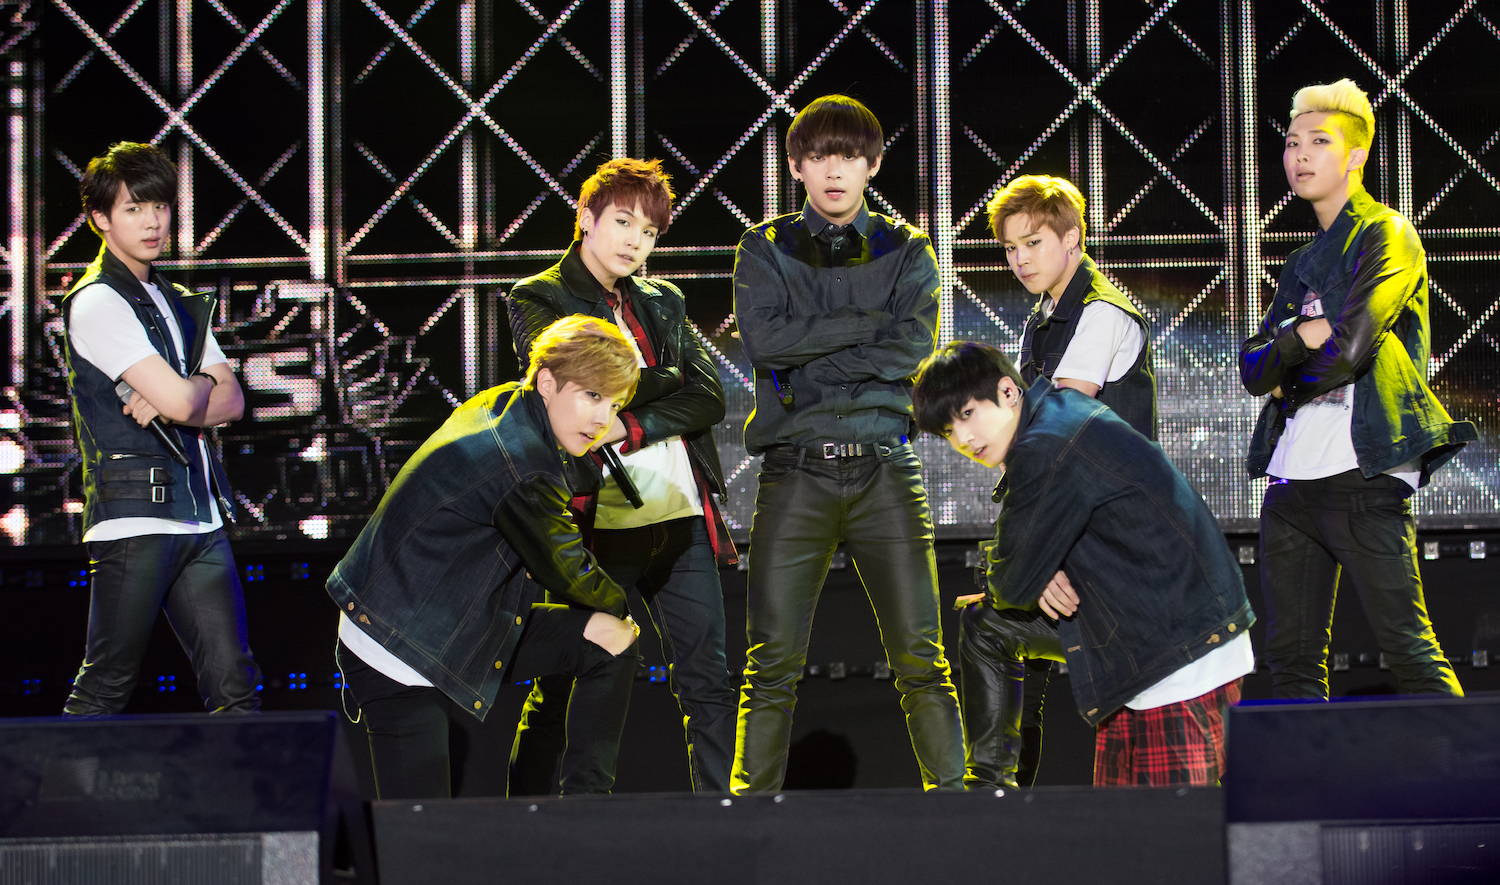 BTS members RM, Suga, J-Hope, Jin, V, Jimin, and Jungkook perform on stage